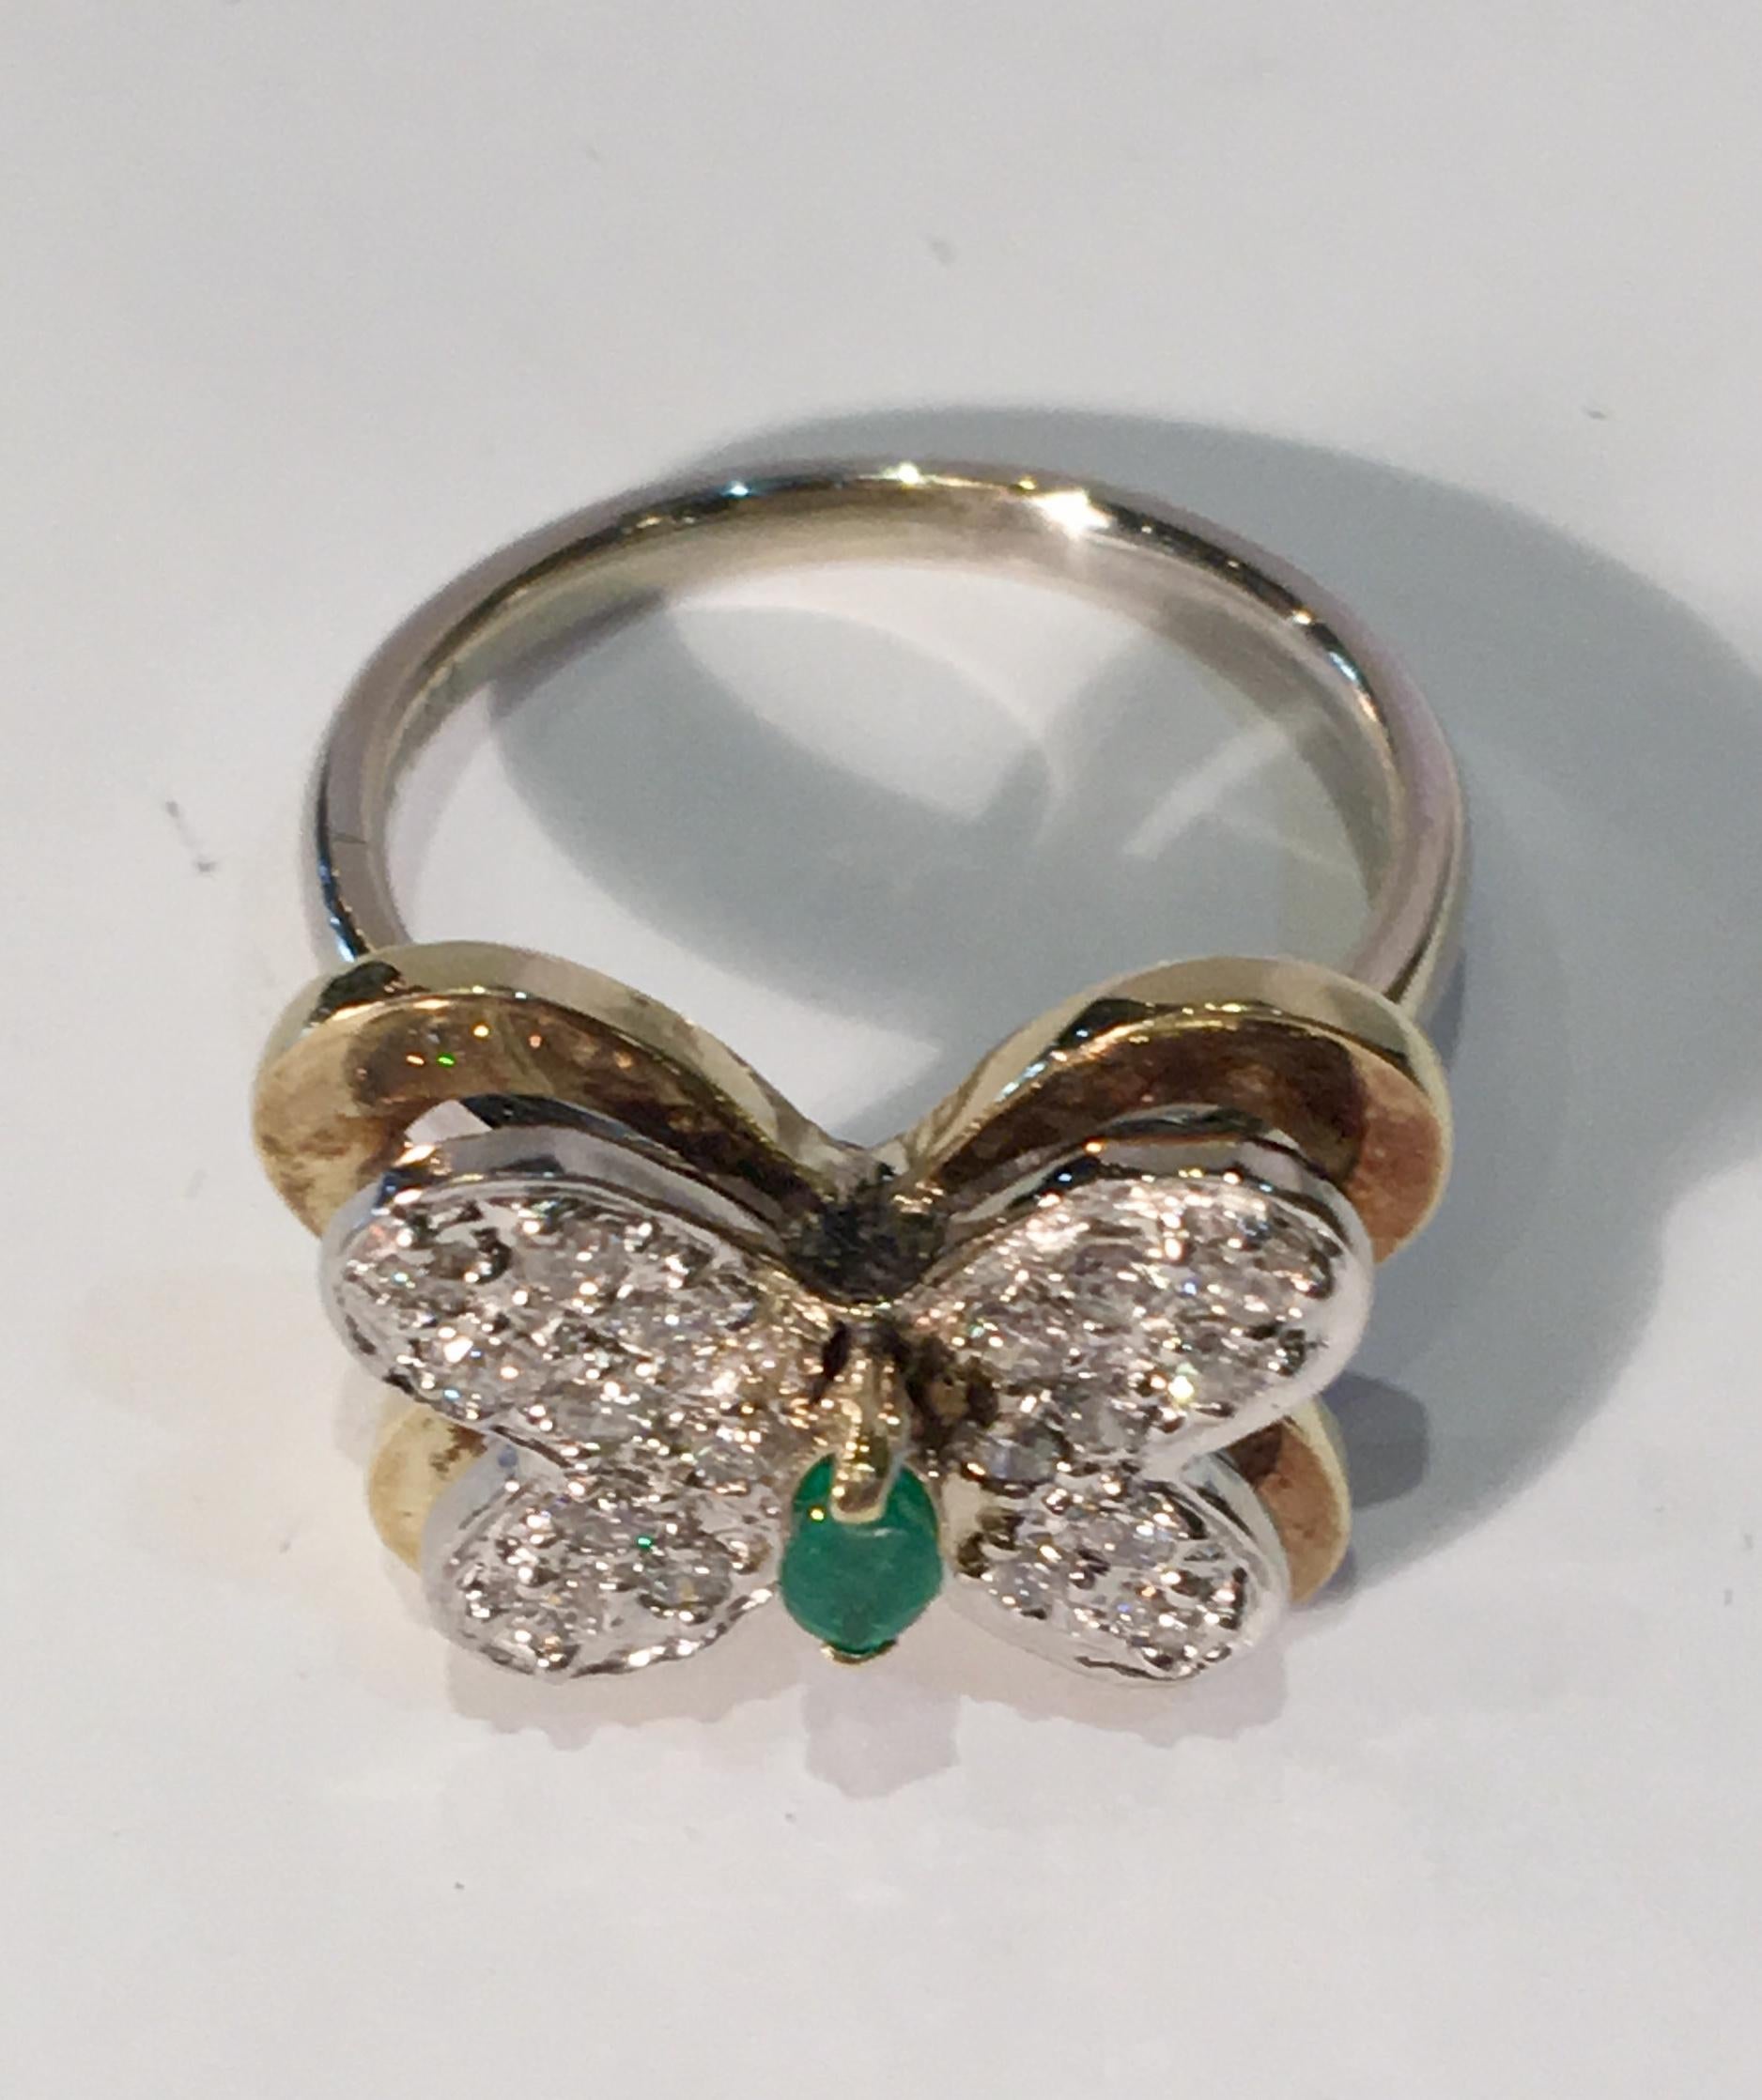 Women's 3 Dimensional 2 Tone 14k Gold Butterfly Ring 1.04 Carats Diamonds and Emerald 